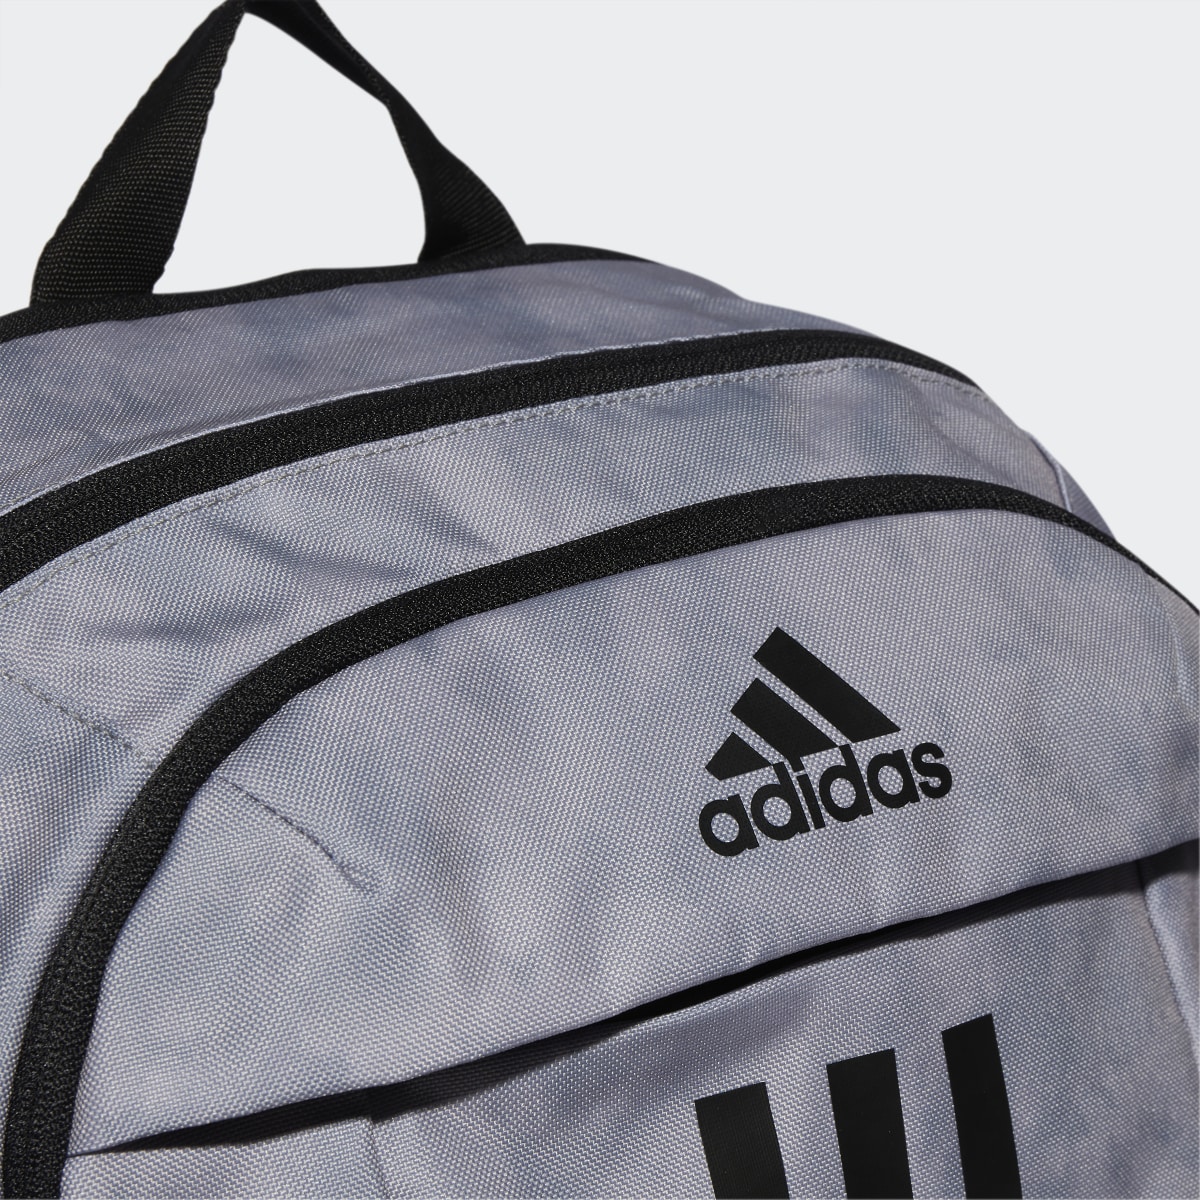 Adidas Power VI Graphic Backpack. 6